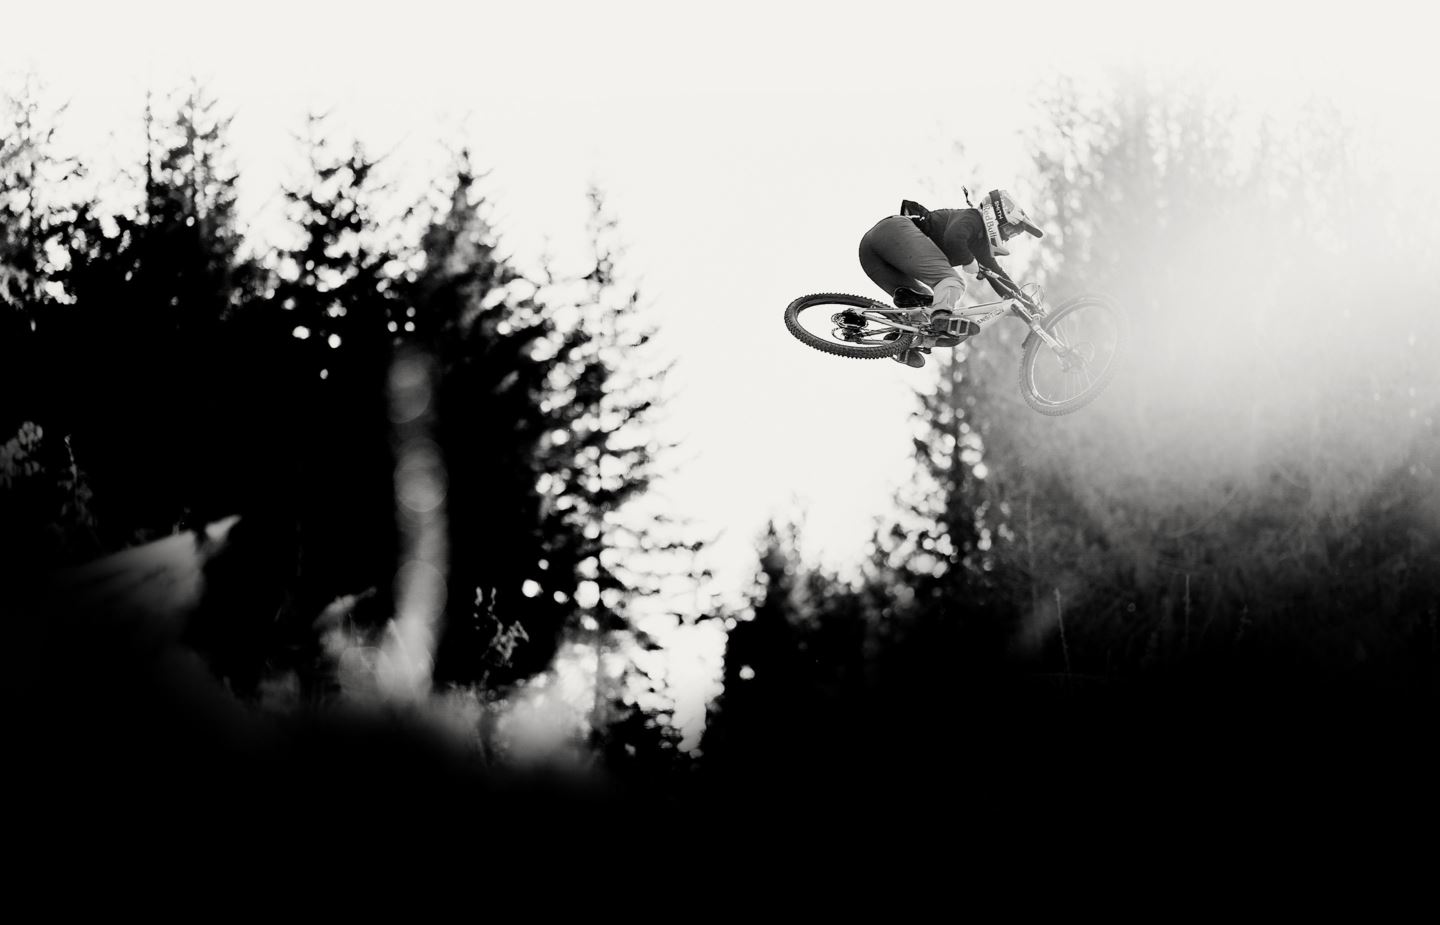 MTB Rider in mid air, black and white image